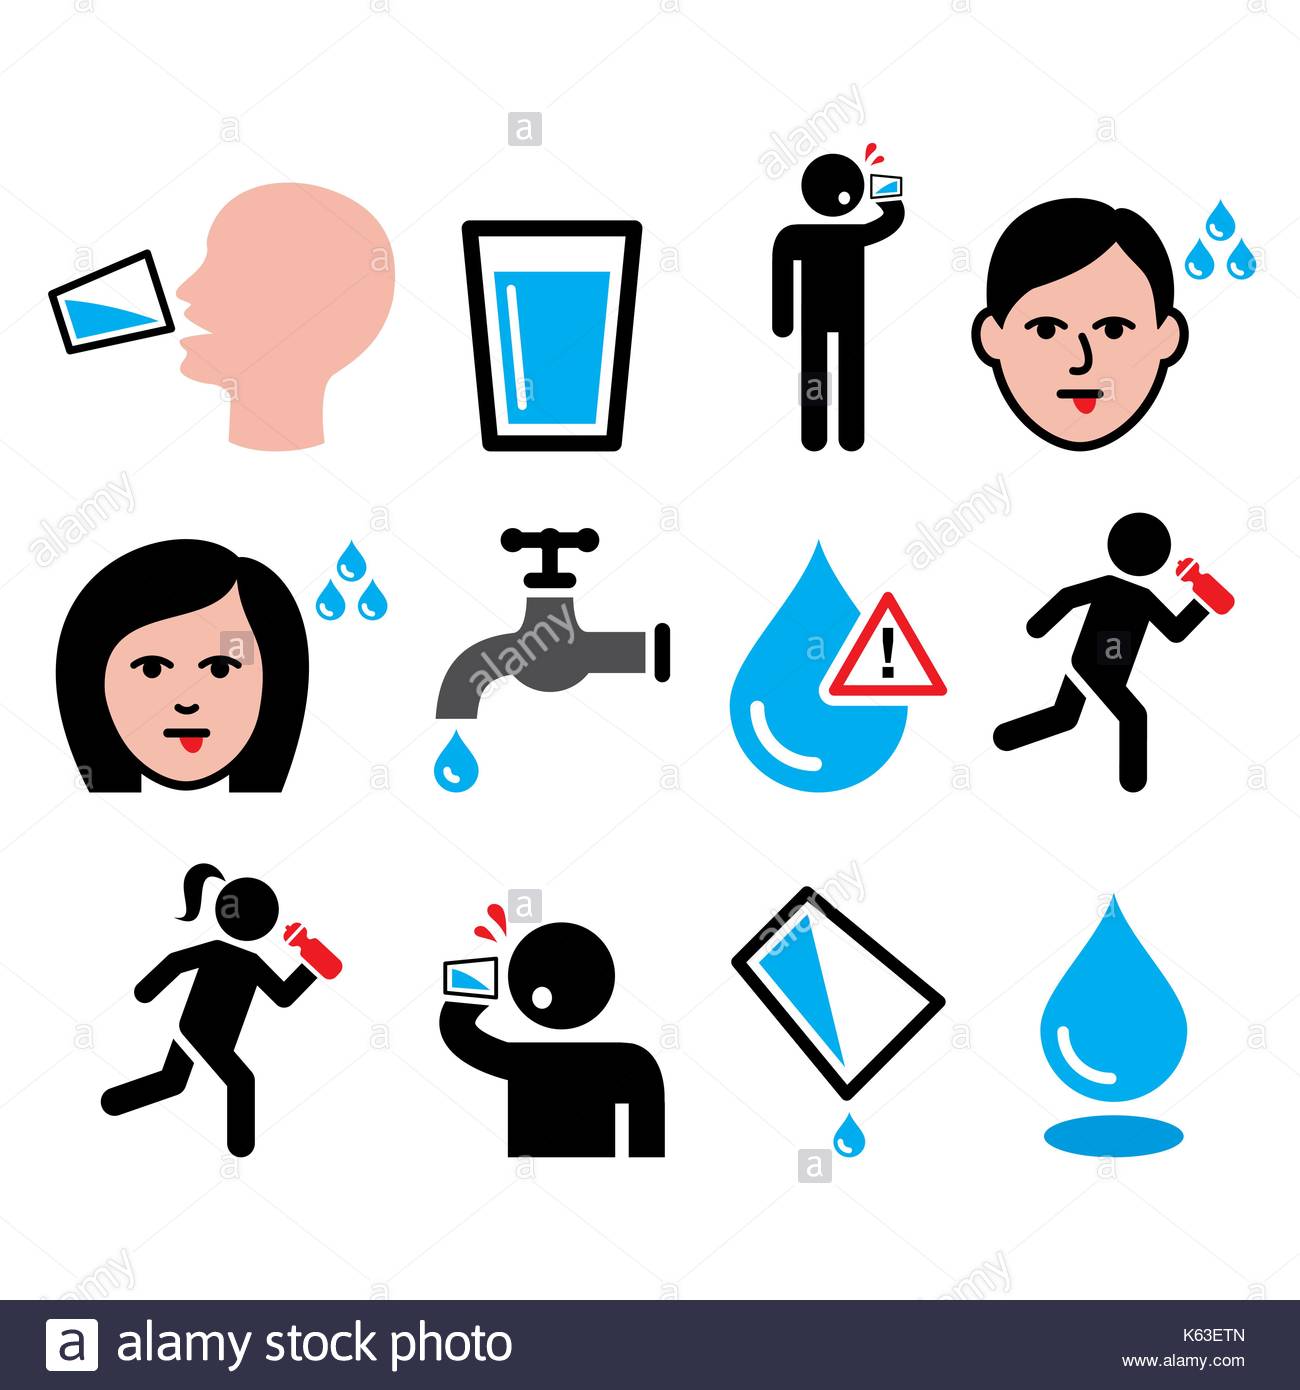 Beverage, cup, drink, drop, thirst, thirsty, water icon | Icon 